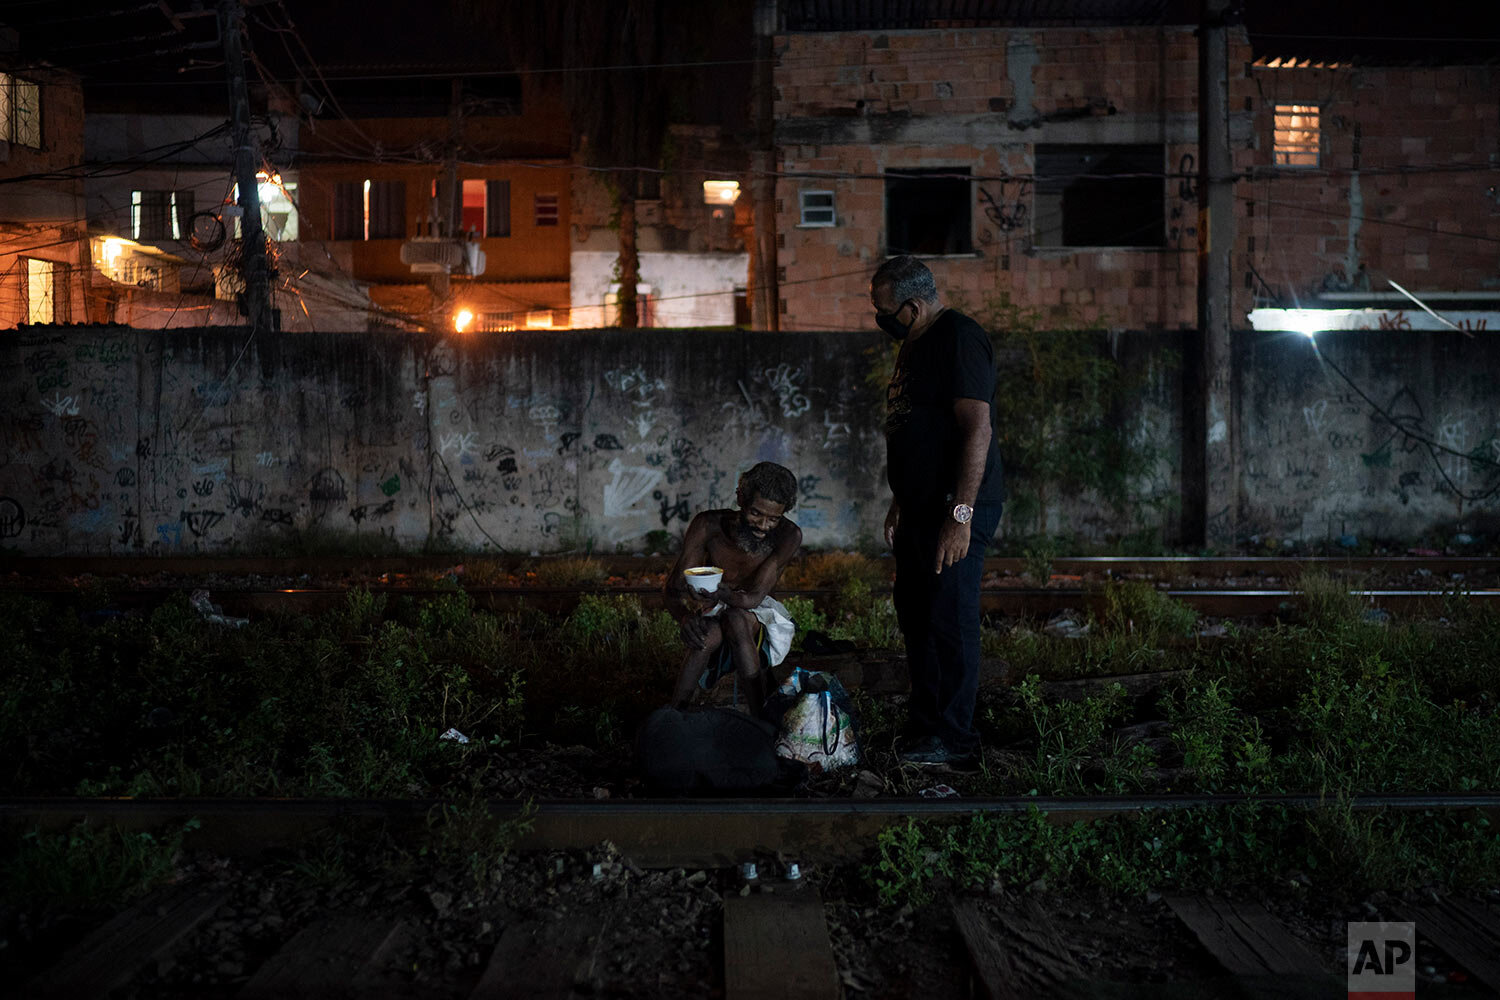  Pastor Celio Ricardo, of the God's Love Evangelical Church and Rehab Center, talks to a drug user in an area known as "cracolandia" or crackland, amid the COVID-19 pandemic in Rio de Janeiro, Brazil, Friday, March 19, 2021. (AP Photo/Felipe Dana) 